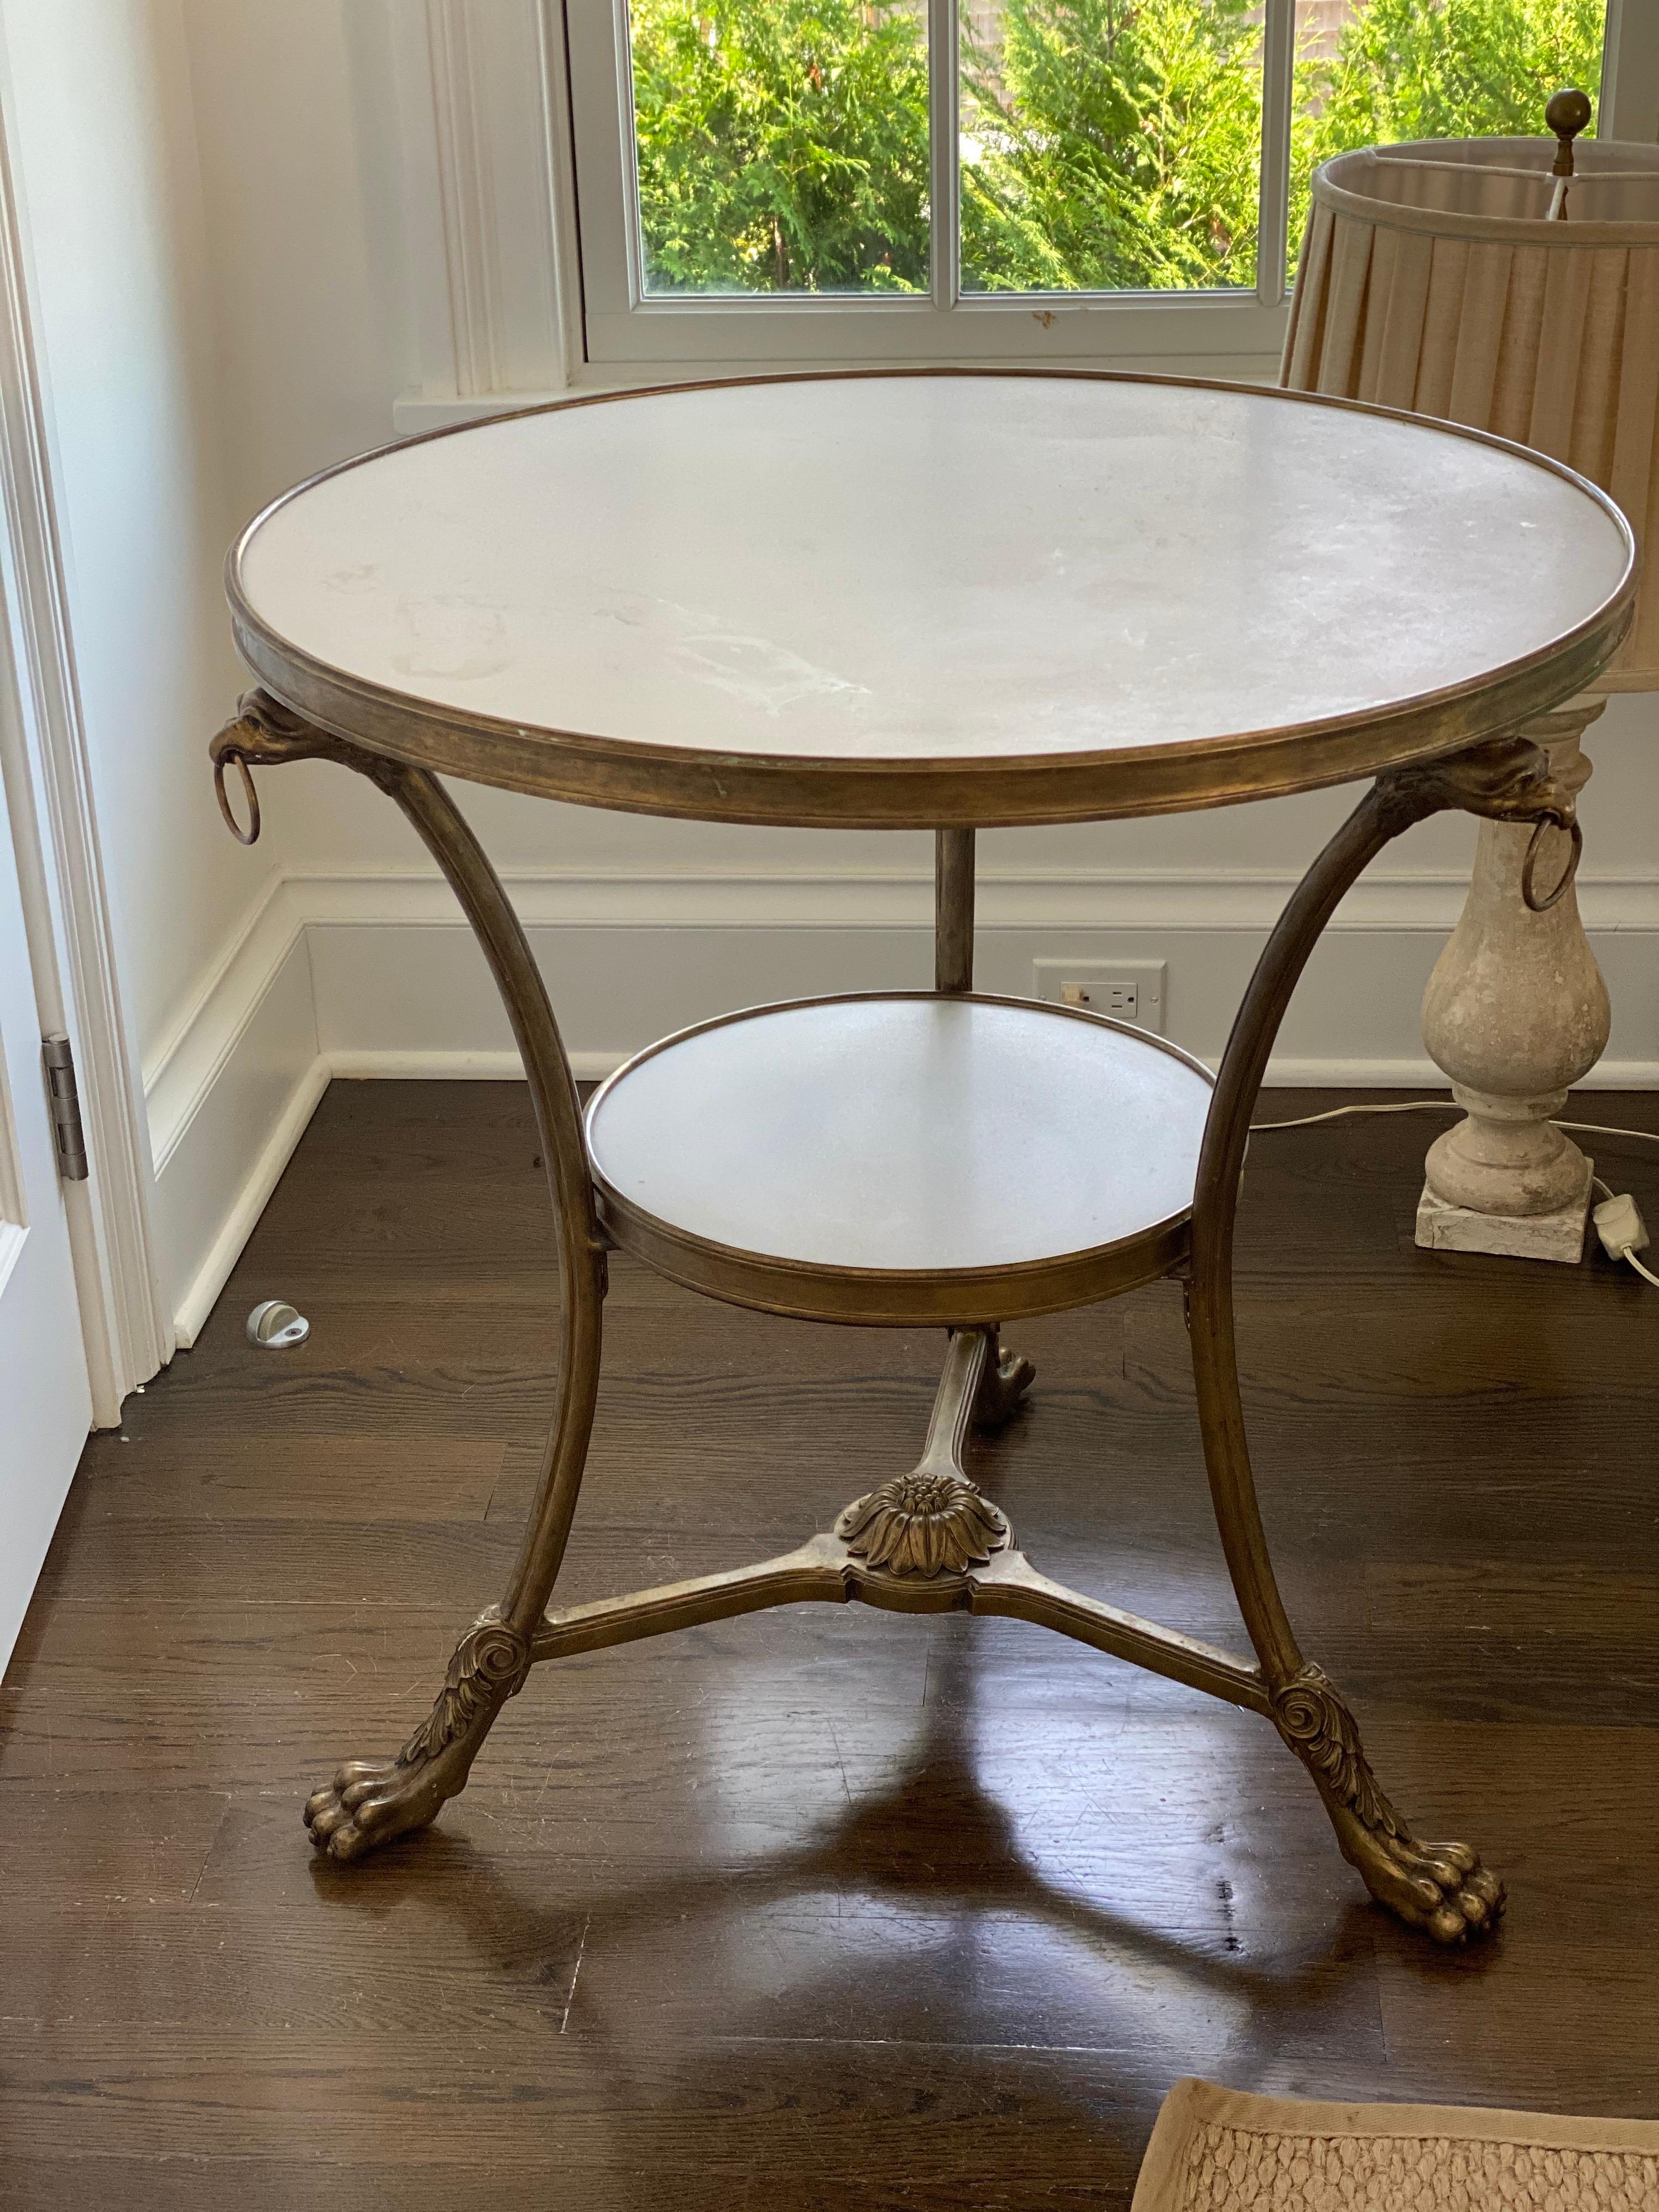 Bronze & marble gueridon table by Ralph Lauren
White marble top and lower round shelf. Bronze form with claw feet.
Light water marks on one marble top. Otherwise very good condition.
Marked Ralph Lauren
Priced to sell, moving in